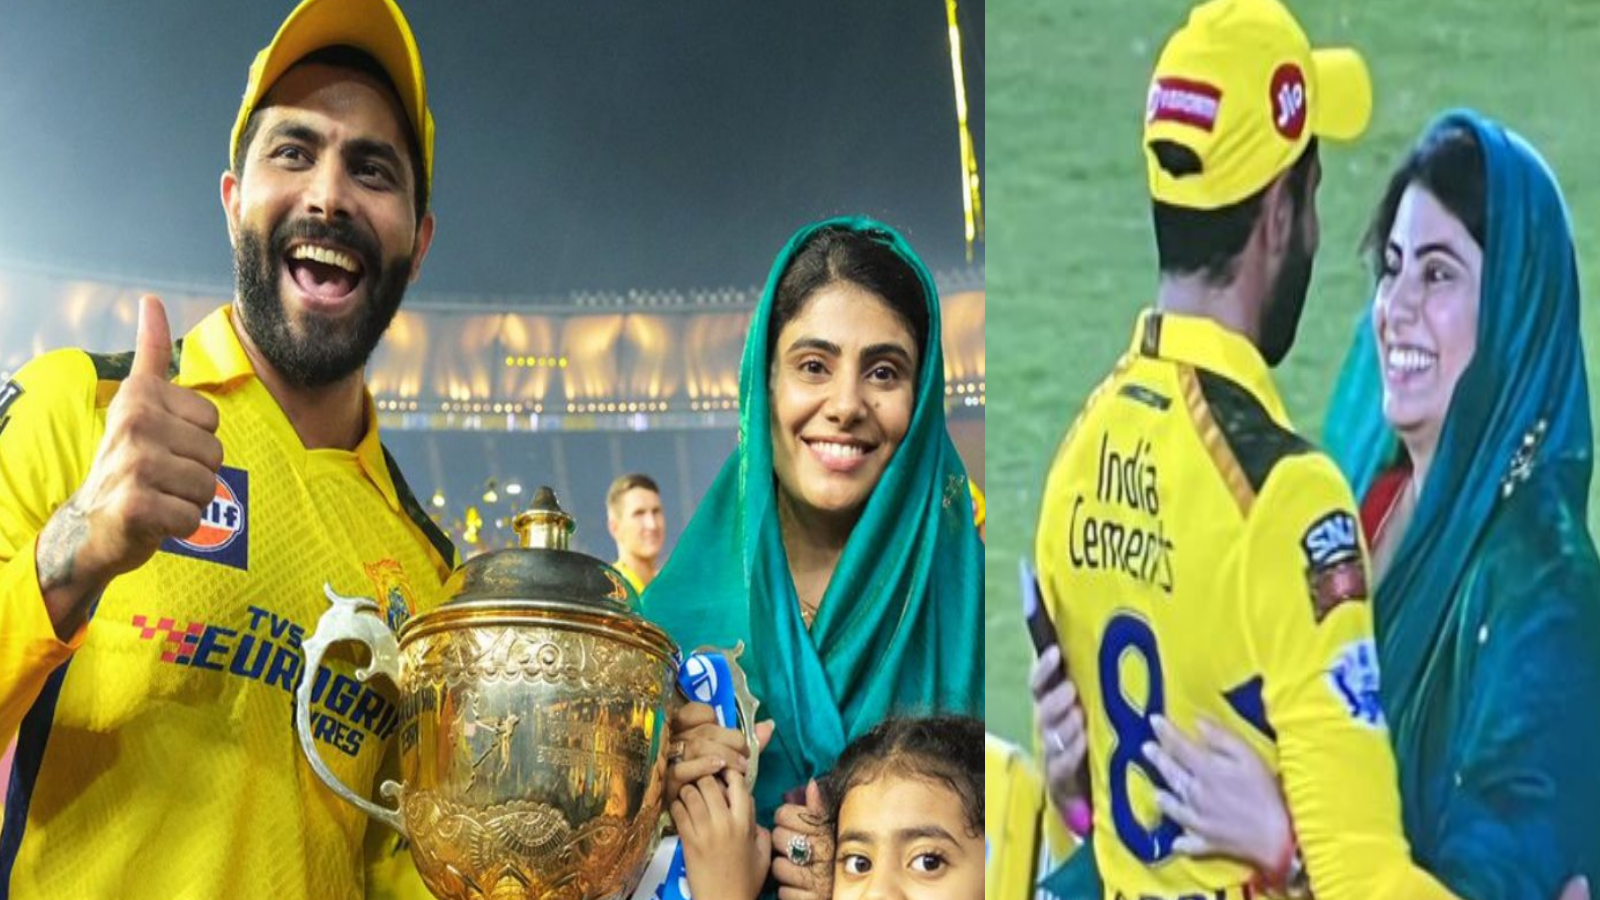 Kudos To Husband After Ipl Win! Although Jadeja Pulled The Chest, The Real Hindu Culture!